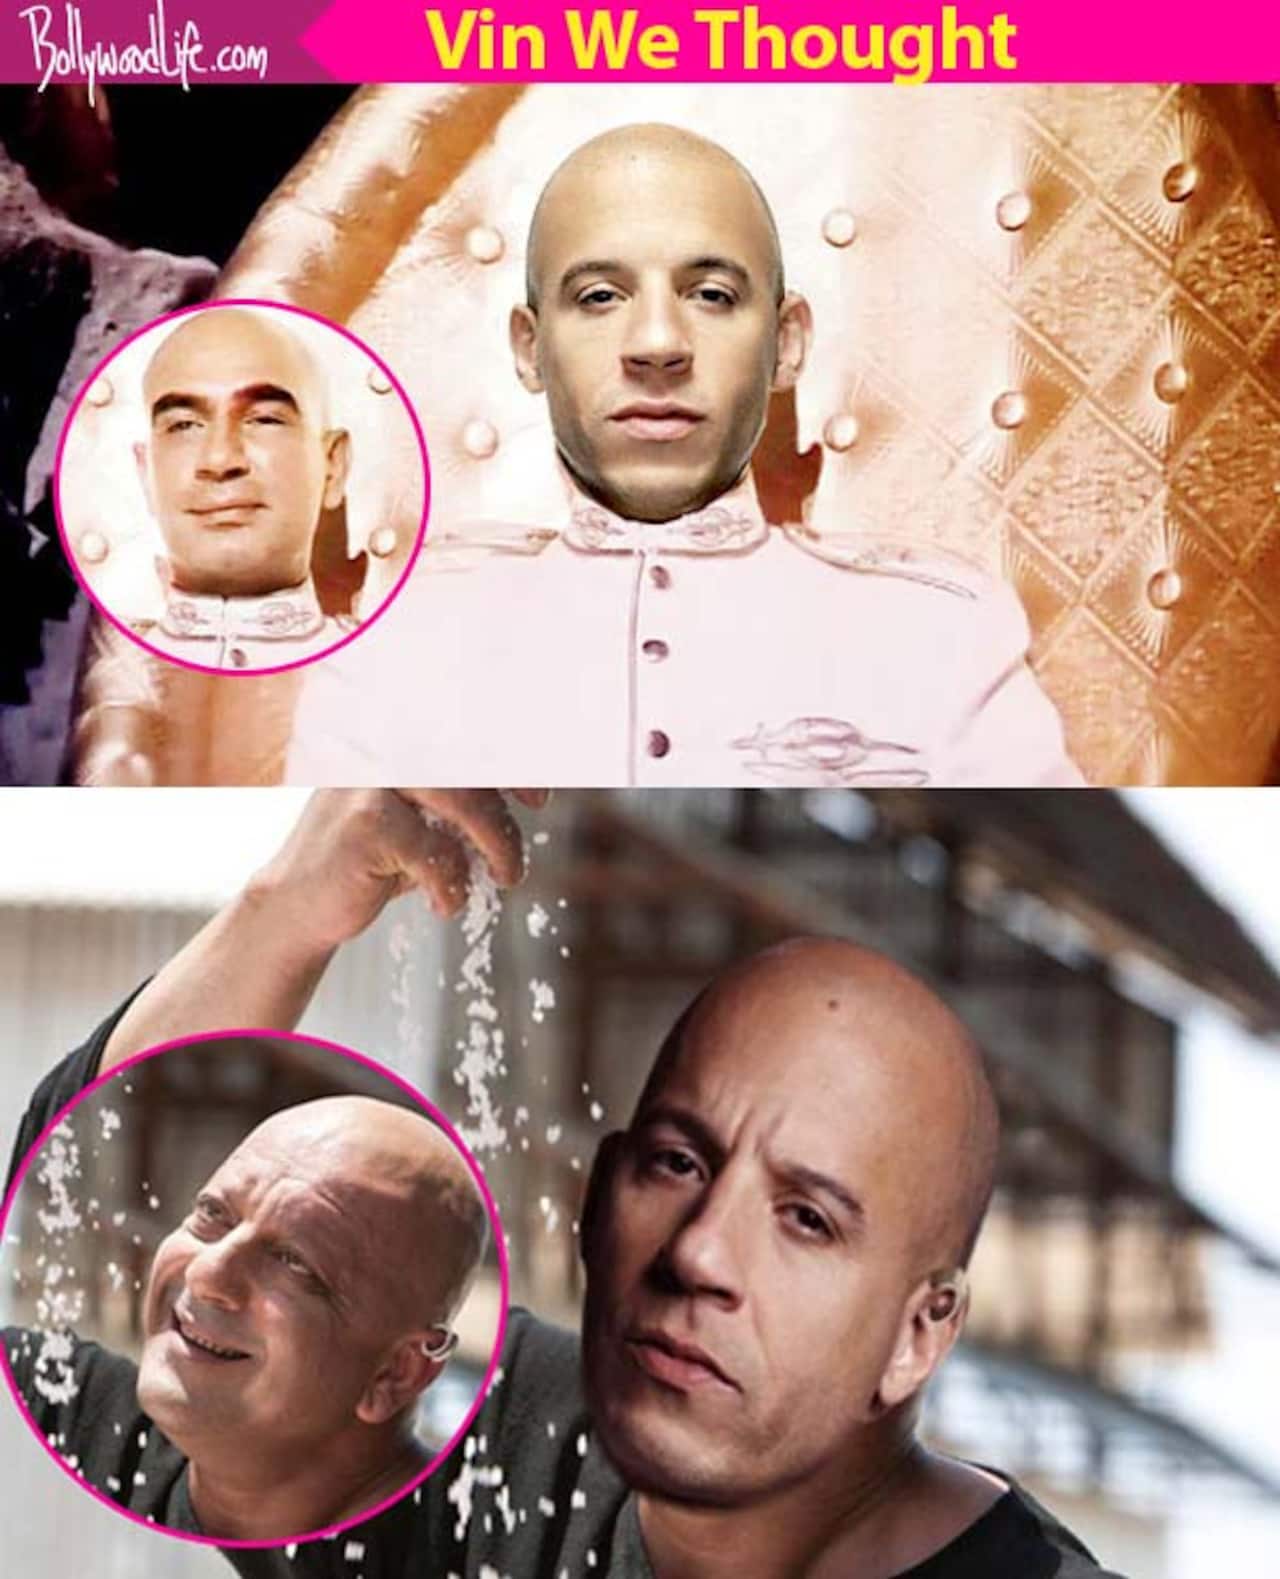 Vin Diesel could have easily done this in Bollywood!